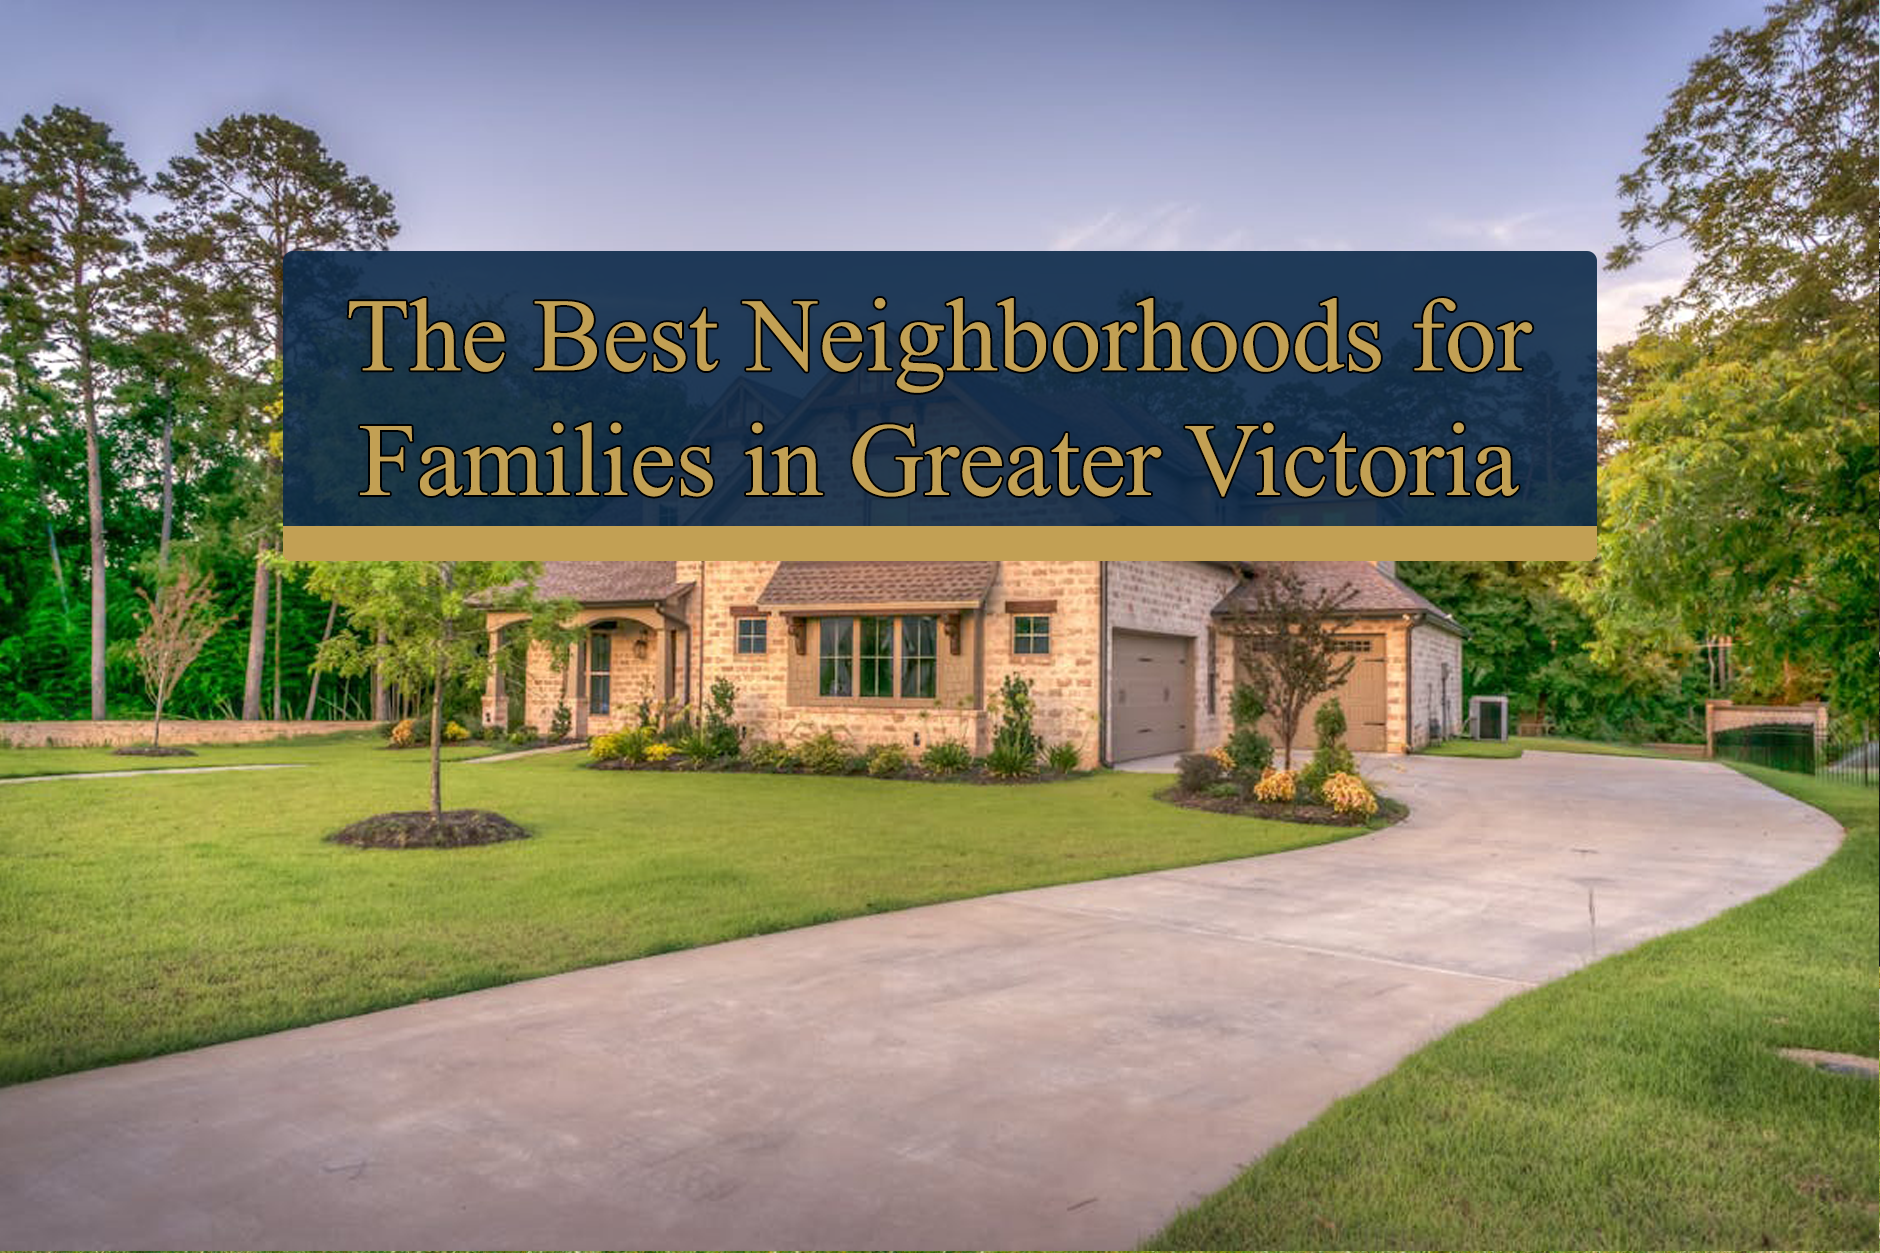 The Best Neighborhoods for Families in Greater Victoria